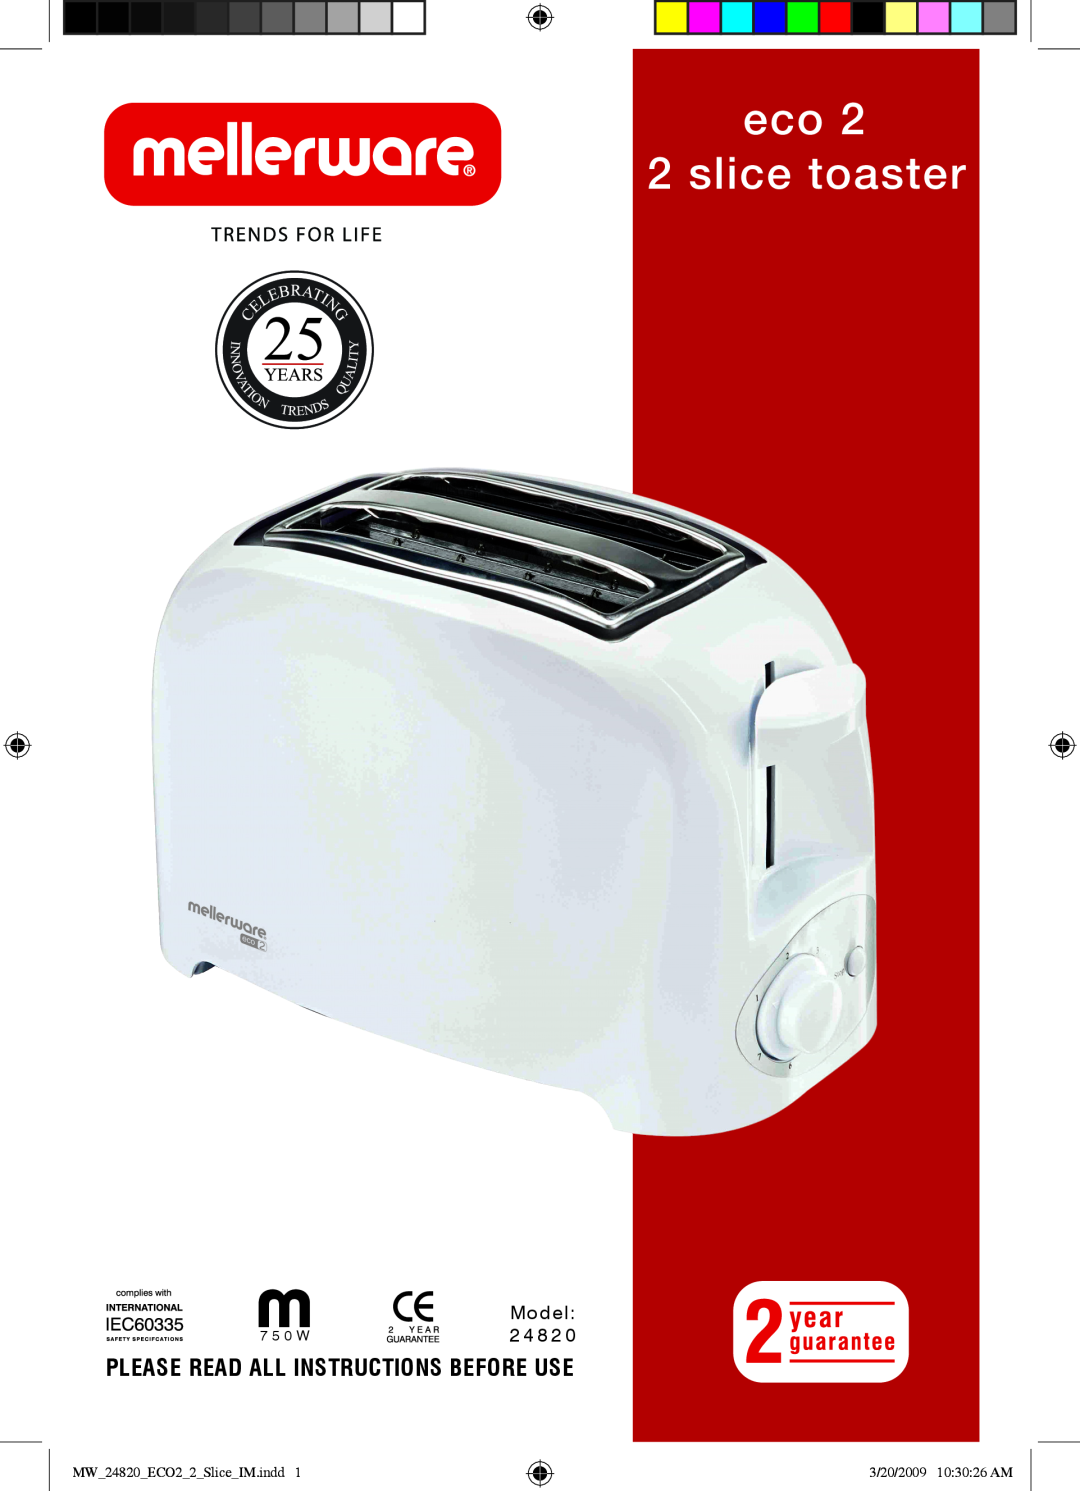 Mellerware 24820750W manual Model, eco 2 slice toaster, Please Read All Instructions Before Use, 7 5 0 W 